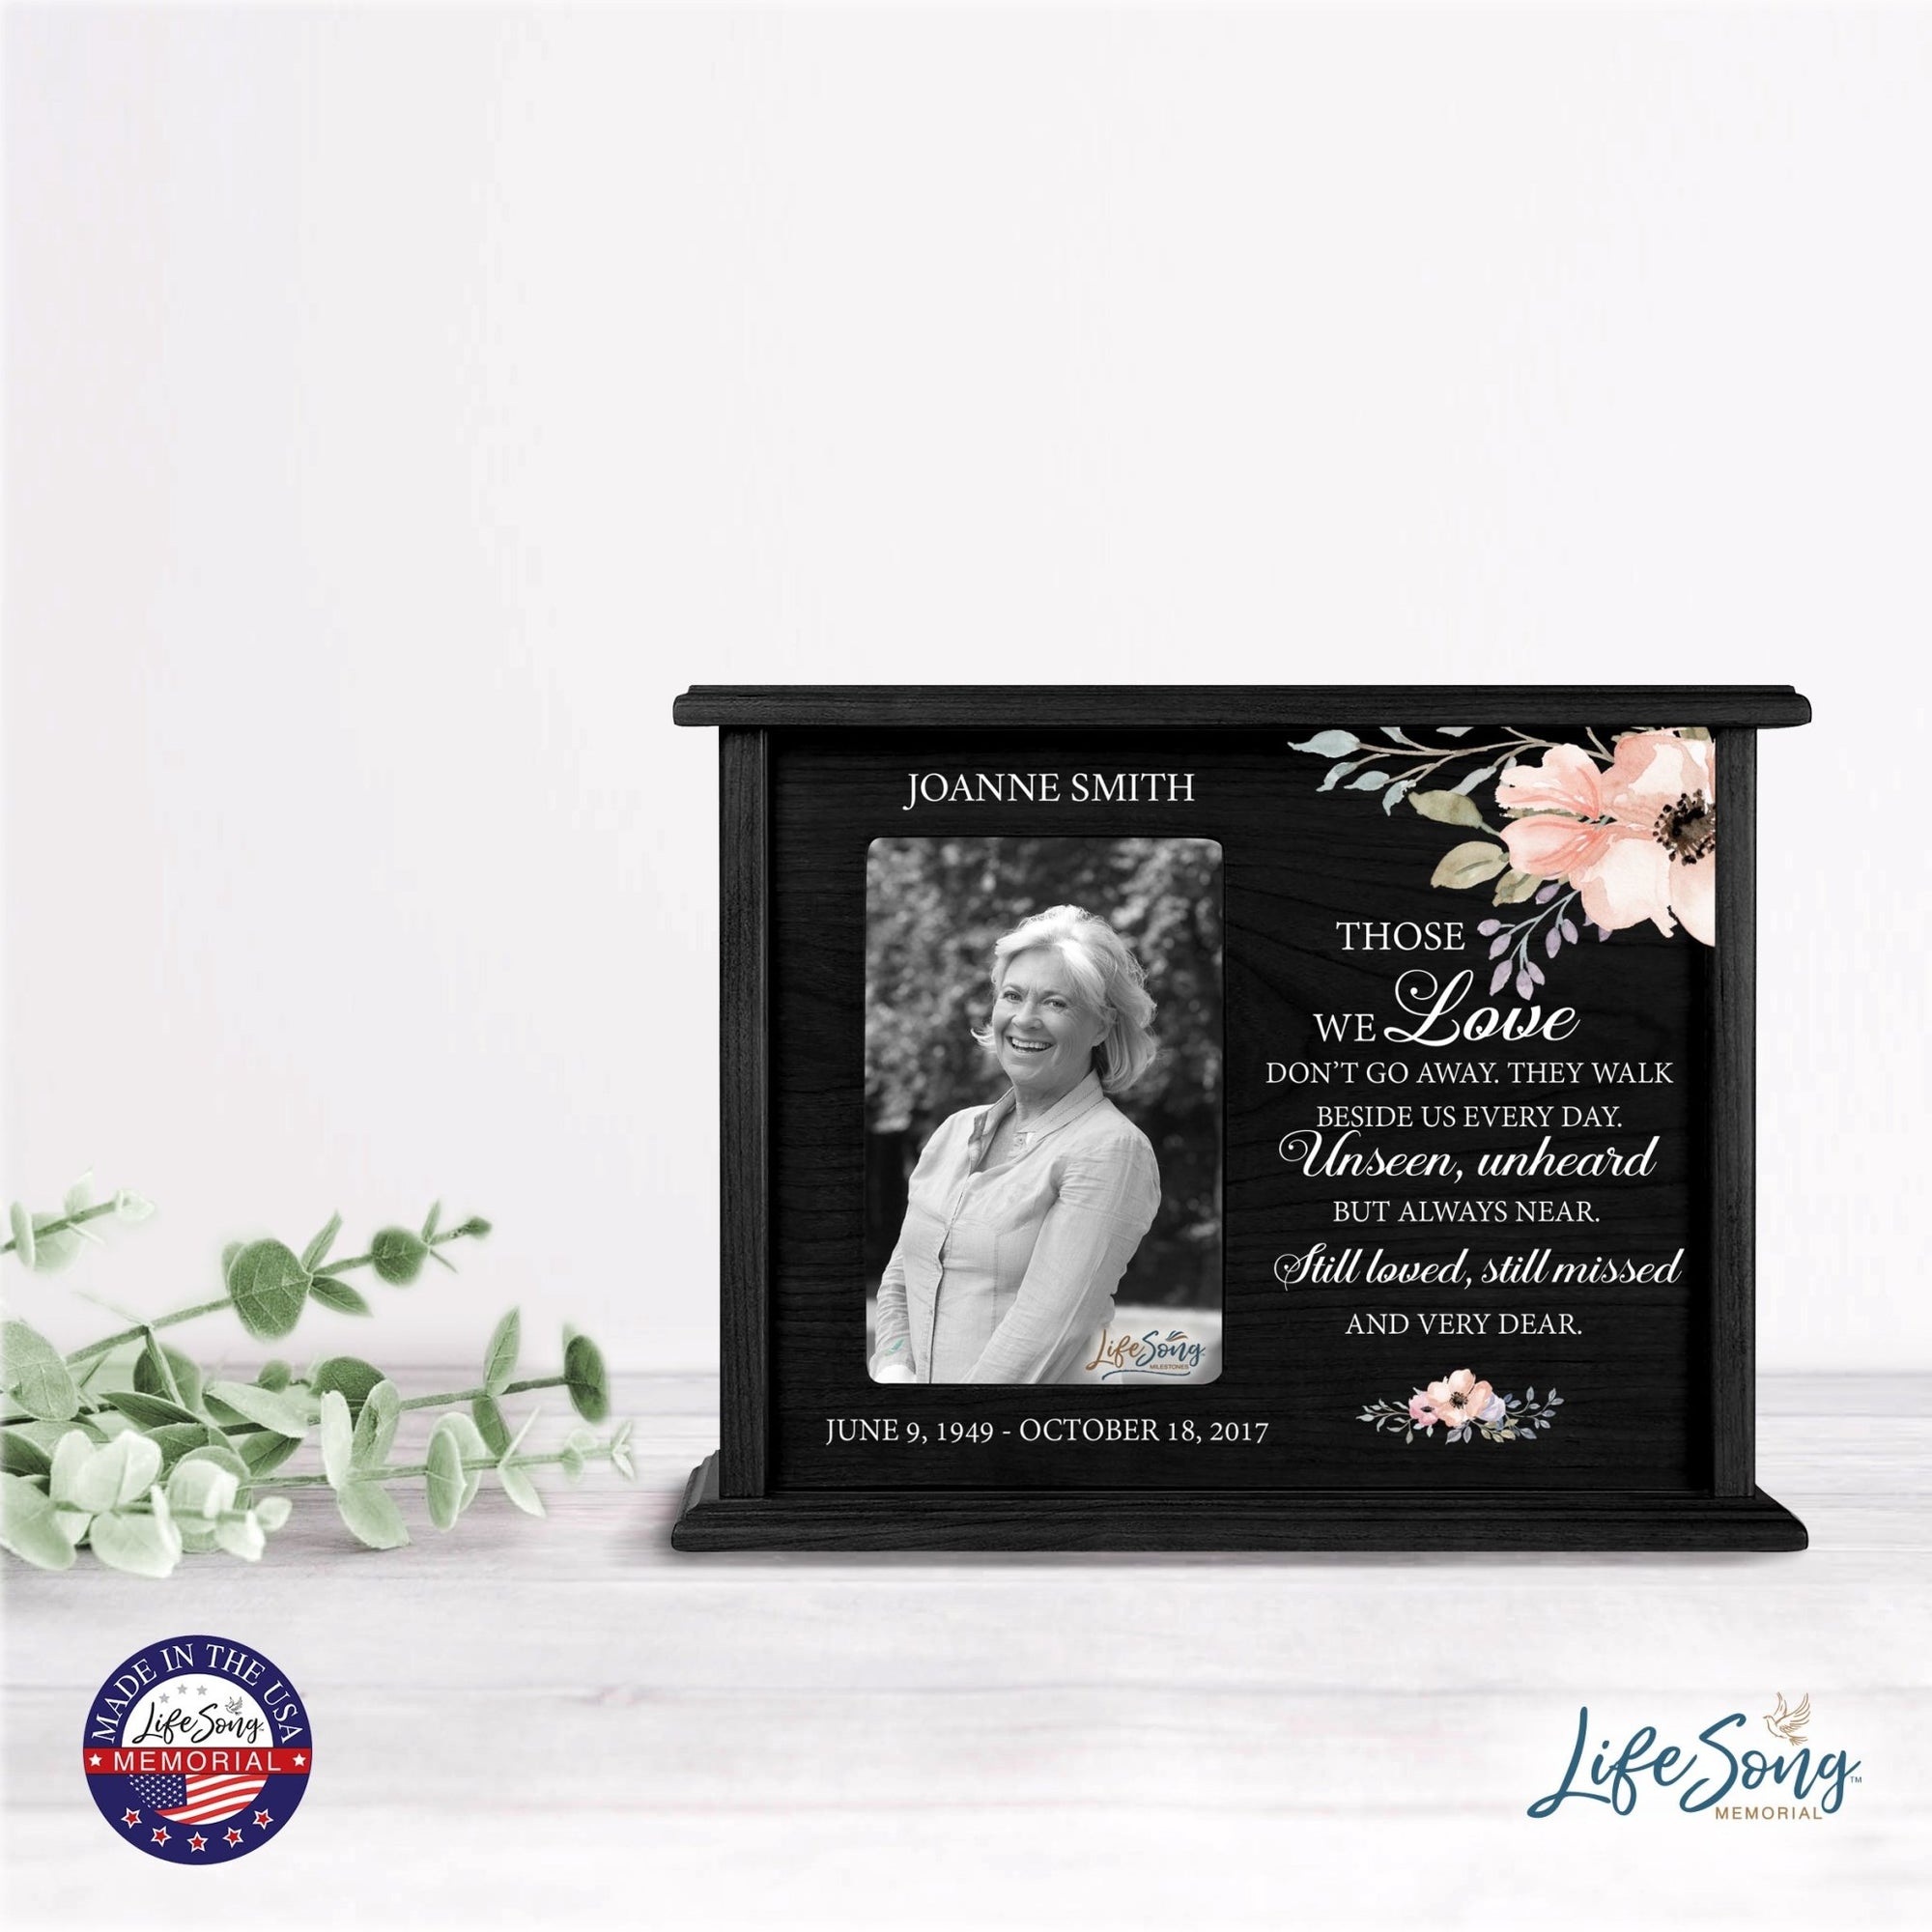 Personalized Memorial Cherry Wood 12 x 4.5 x 9 Cremation Urn Box with Picture Frame holds 200 cu in of Human Ashes and 4x6 Photo - Those We Love Don’t Go - LifeSong Milestones